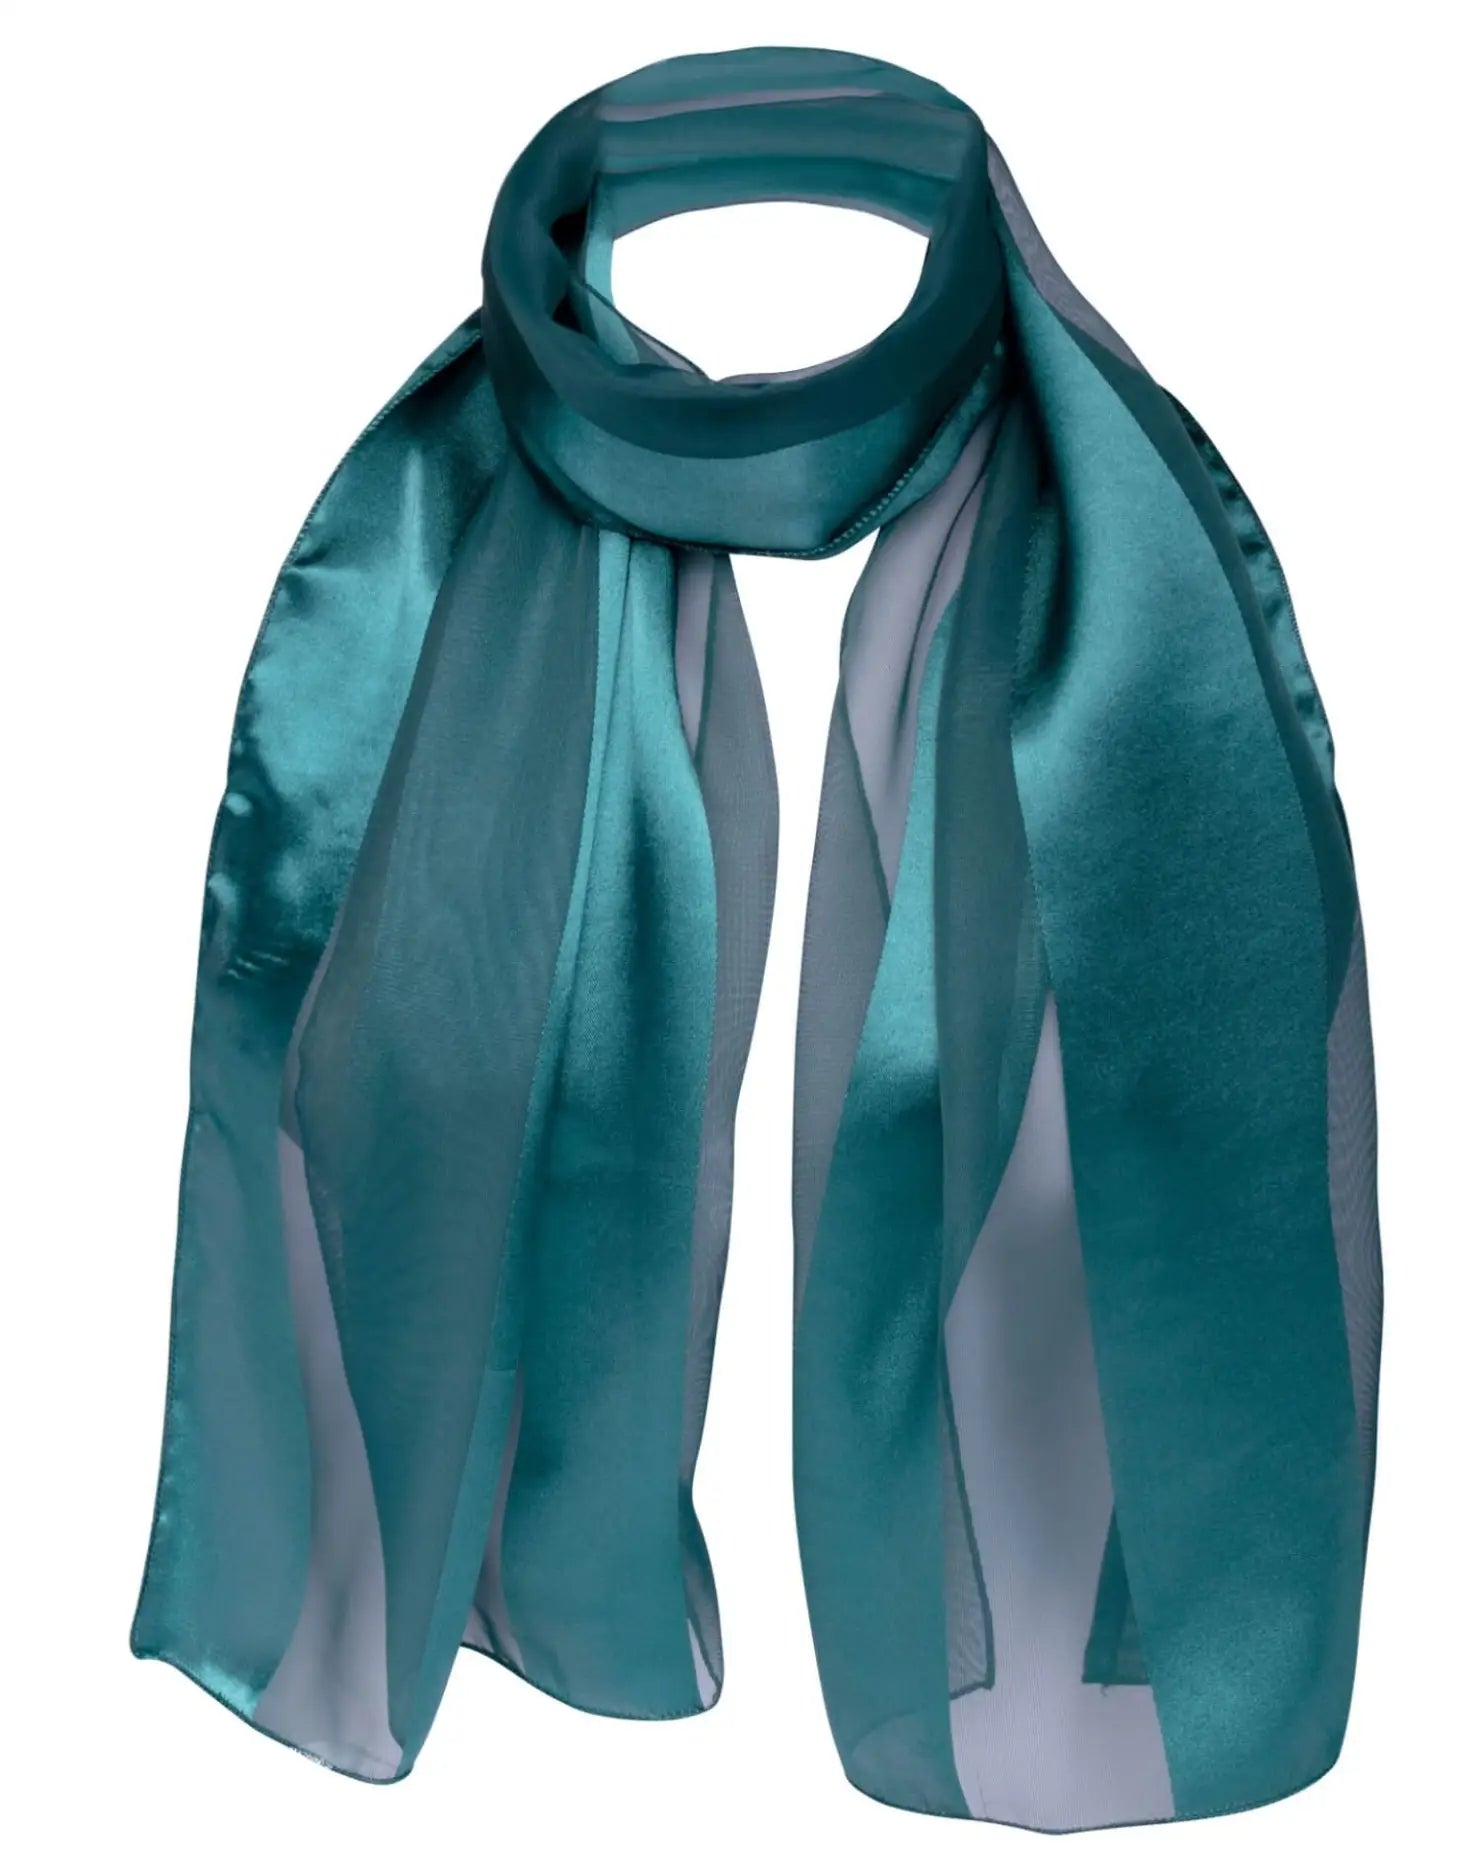 A teal green satin stripe scarf with grey border - Solid Shimmering Satin Stripe Scarf